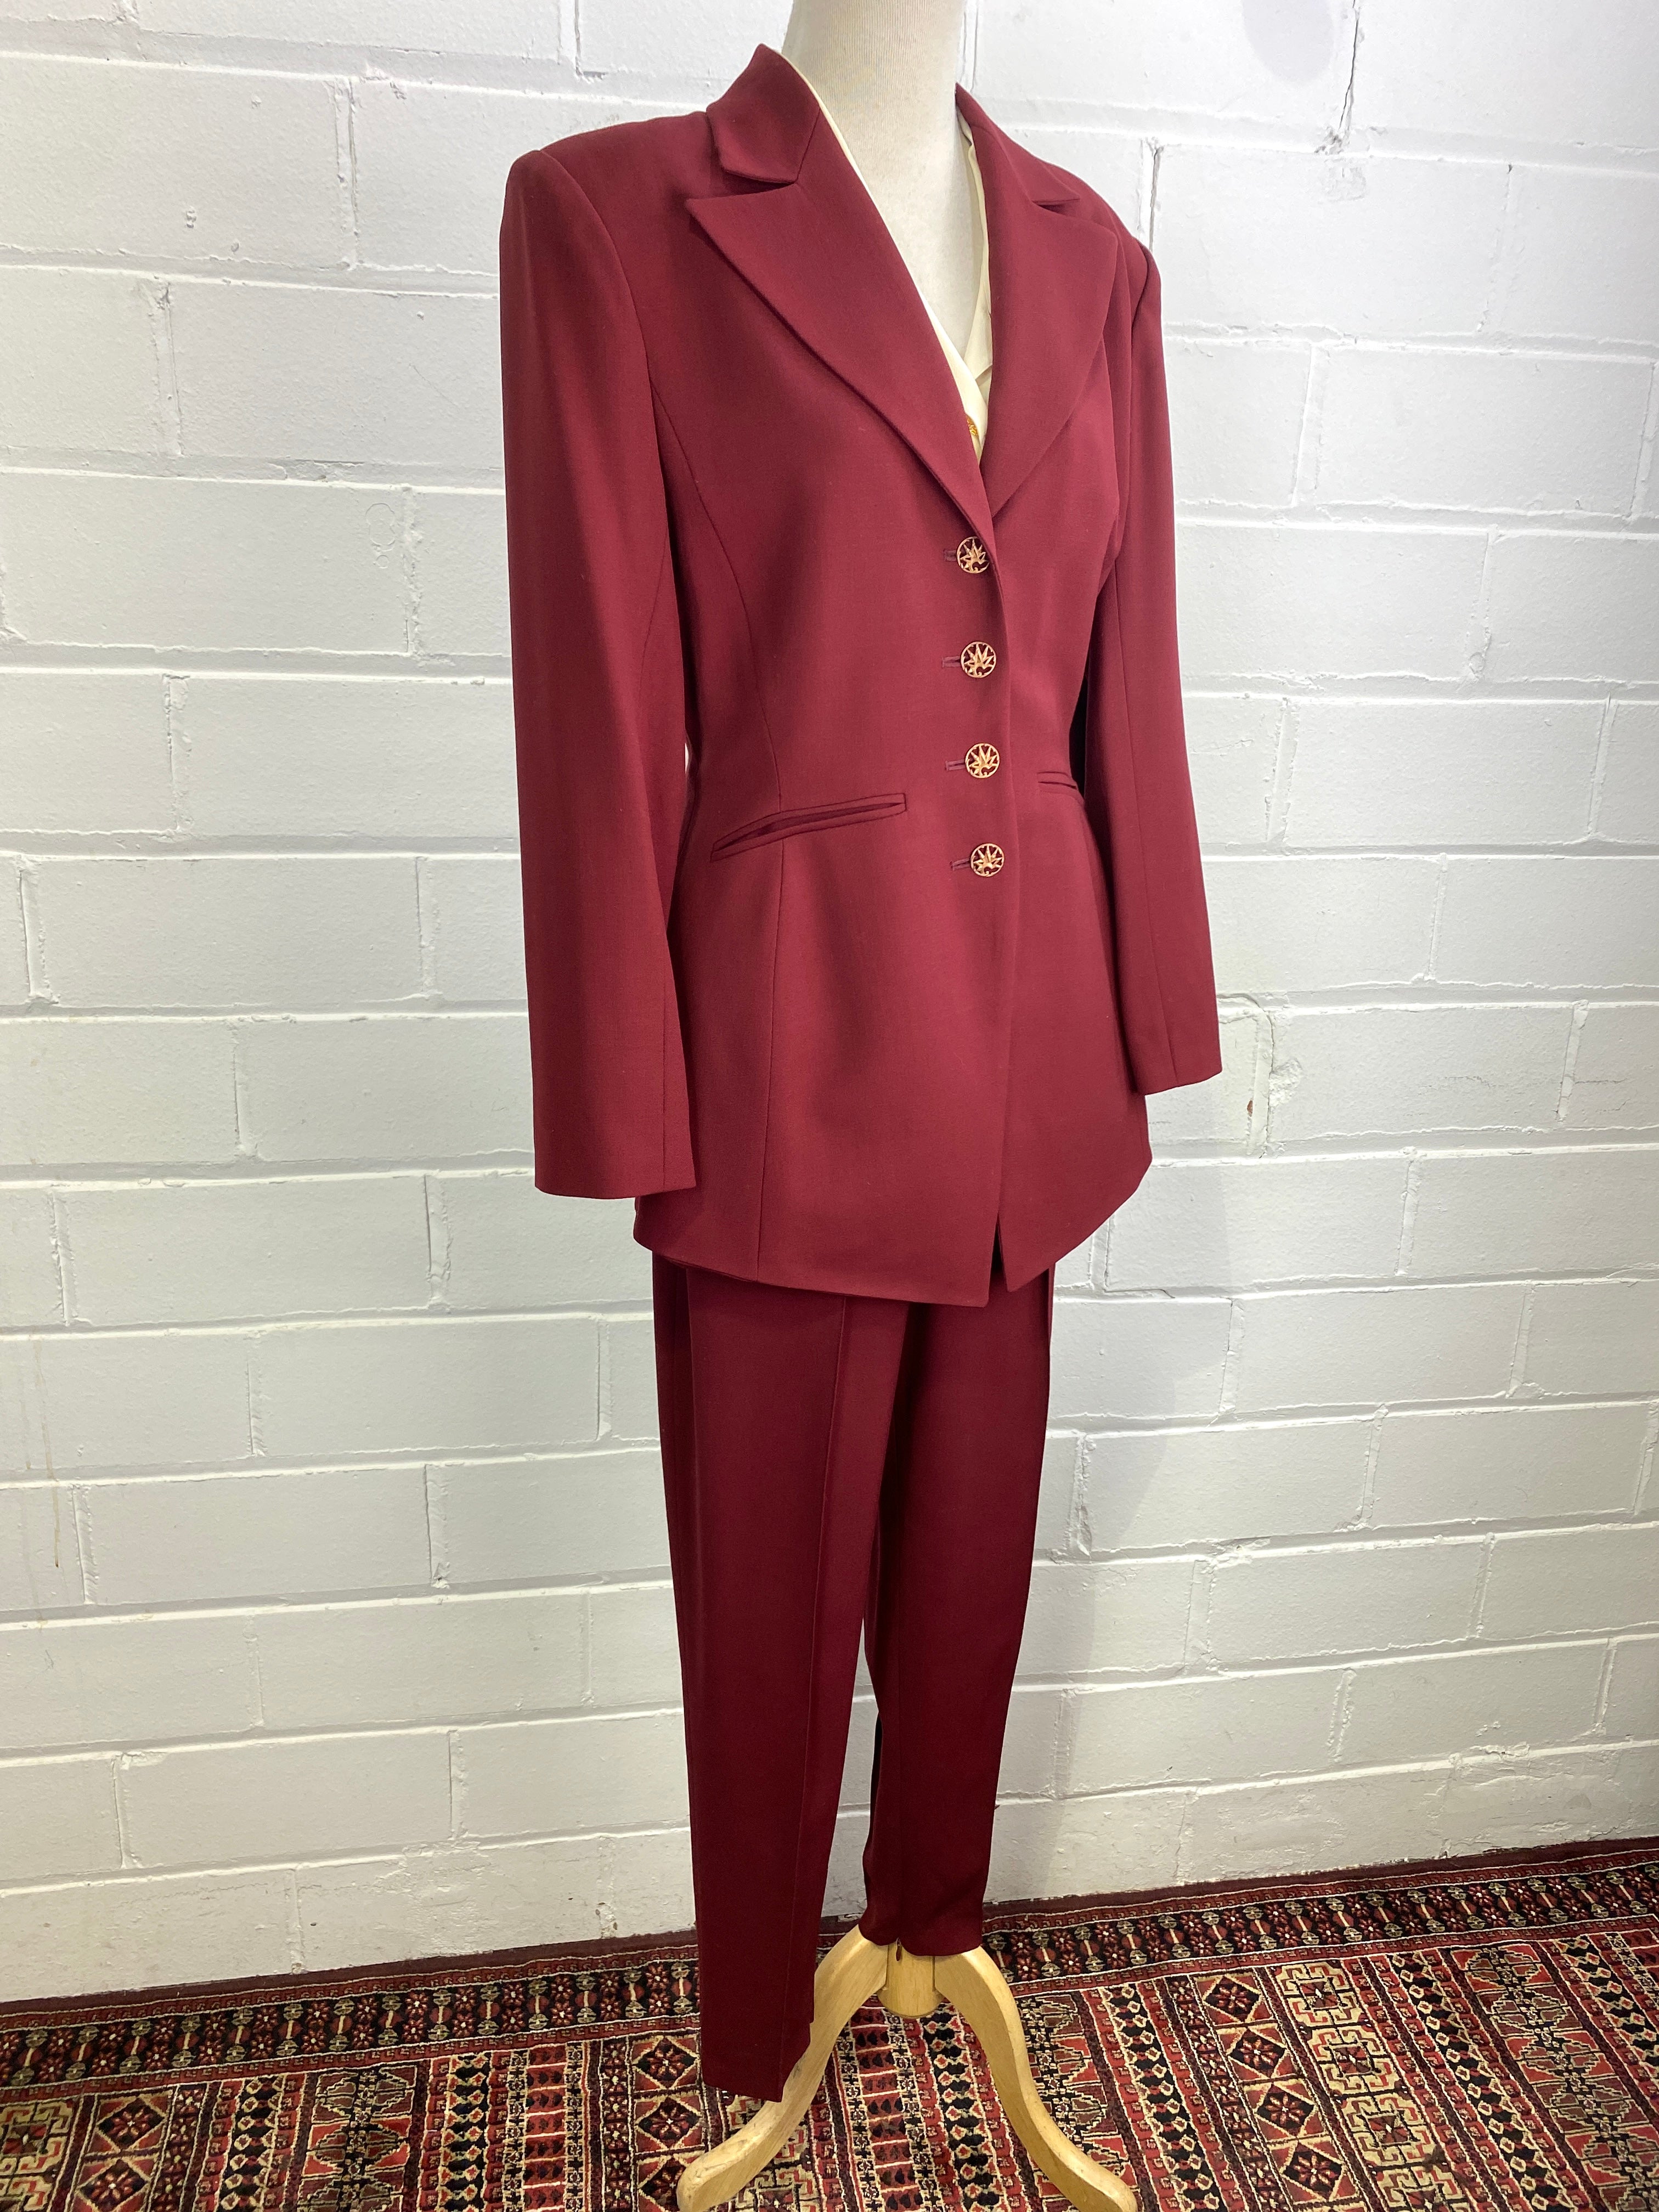 Women's Double-Breasted Pant Suit | 100% Wool Super 120s | Lady Bespoke